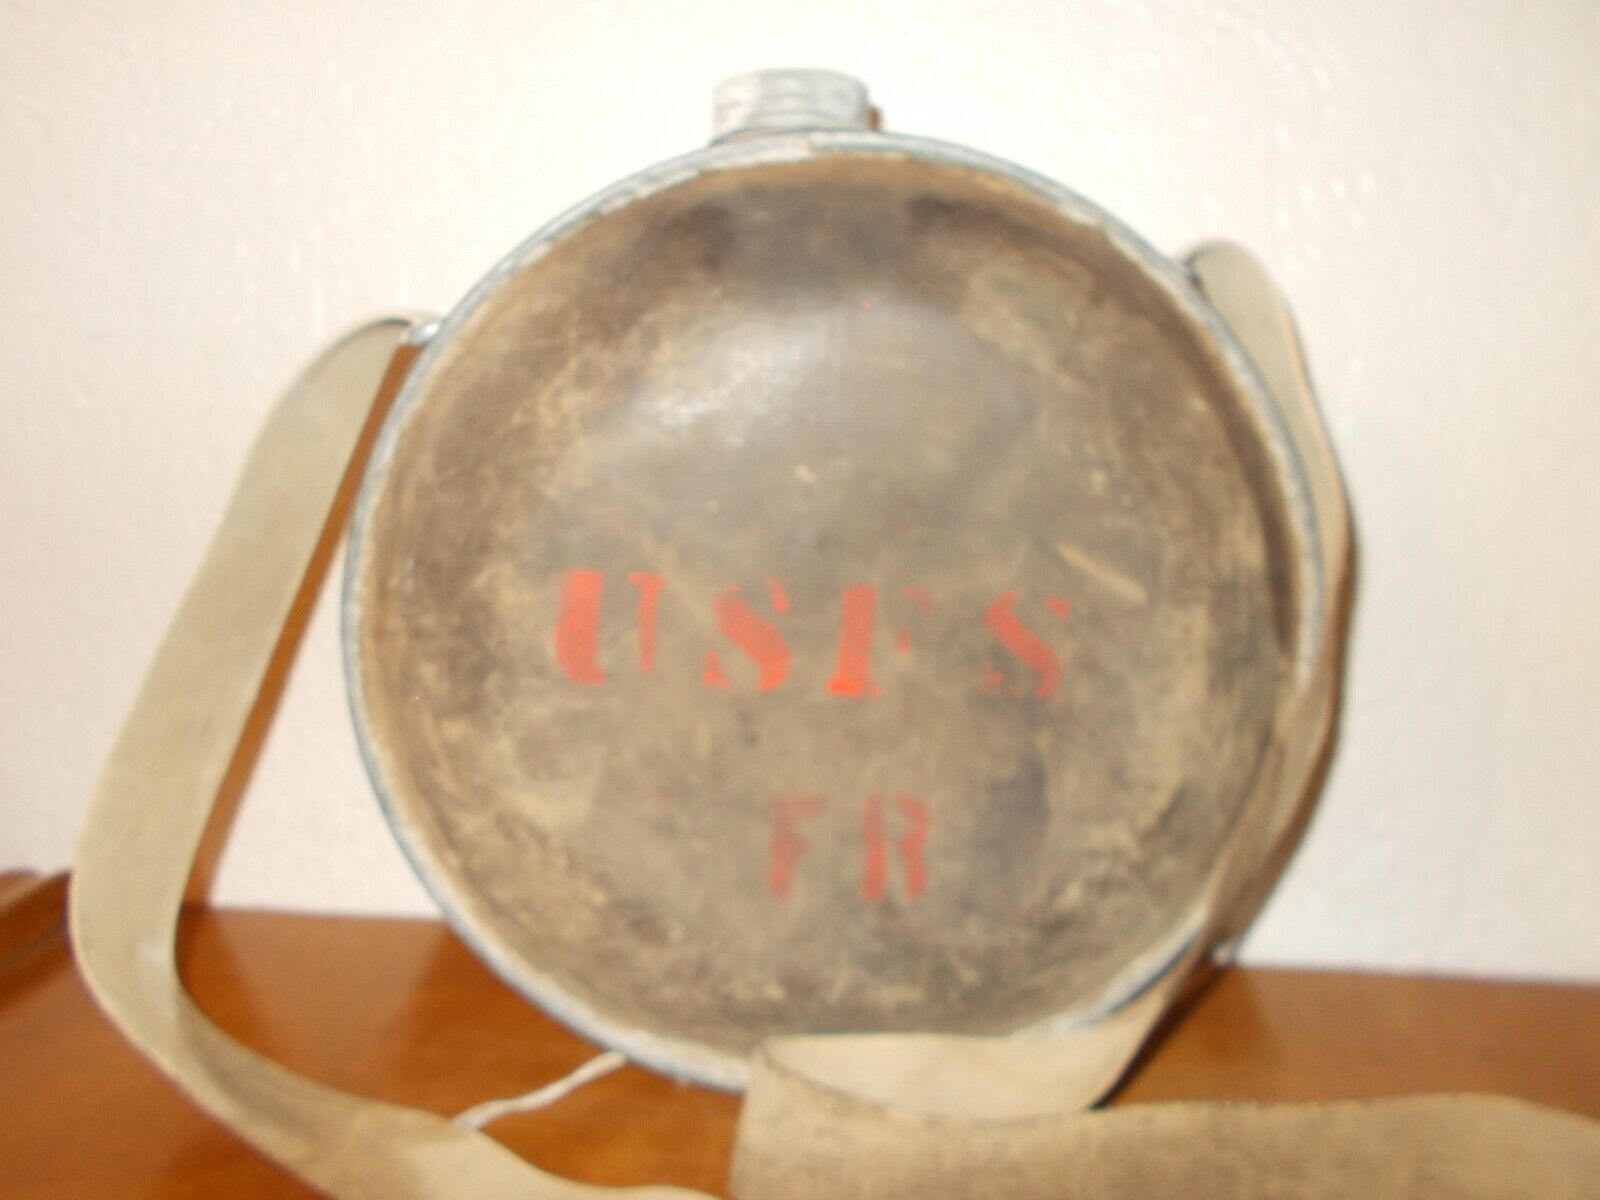 Vintage USFS United States Forest Service Canteen